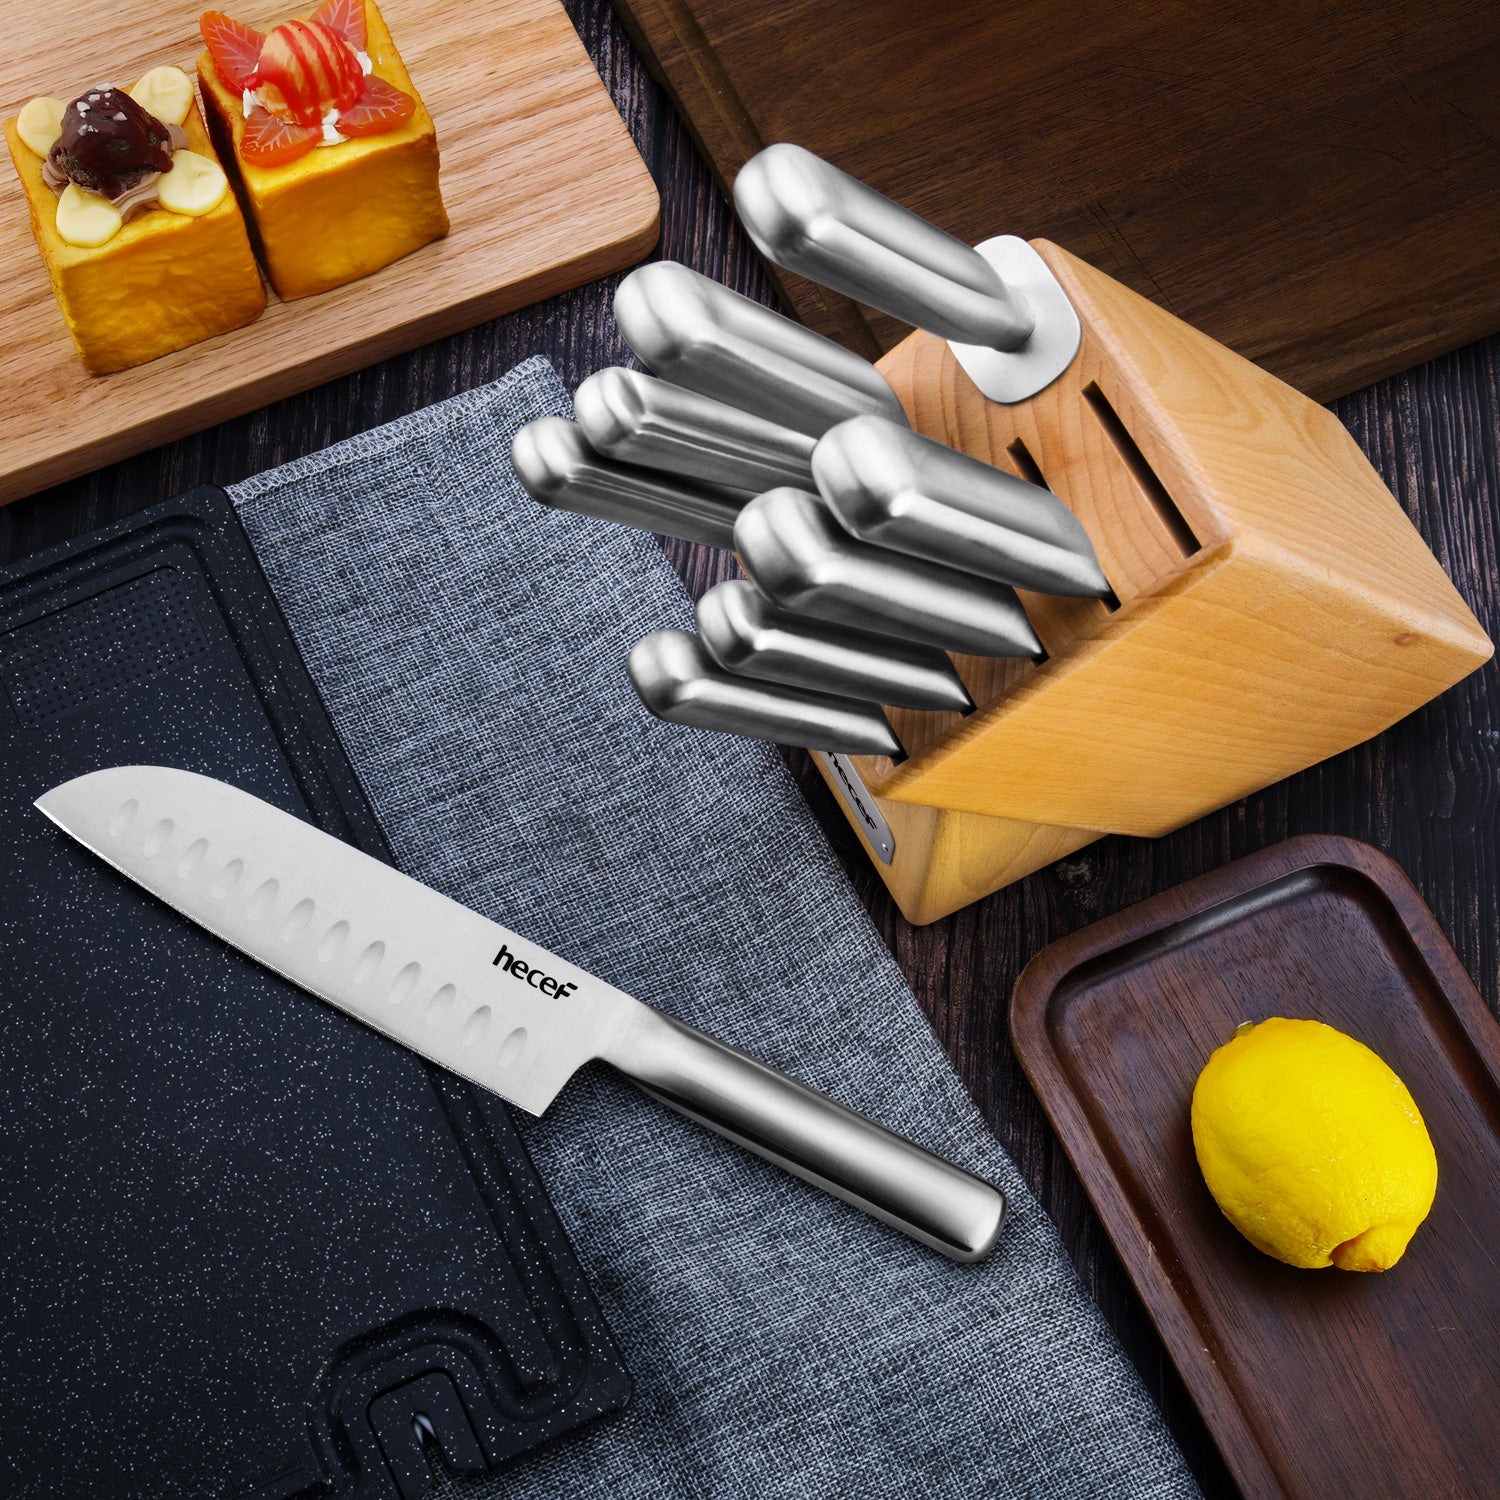 Hecef 14pcs Kitchen Knife Set High Carbon Stainless Steel Cutlery Gift Set with Wooden Block, Size: One size, Yellow